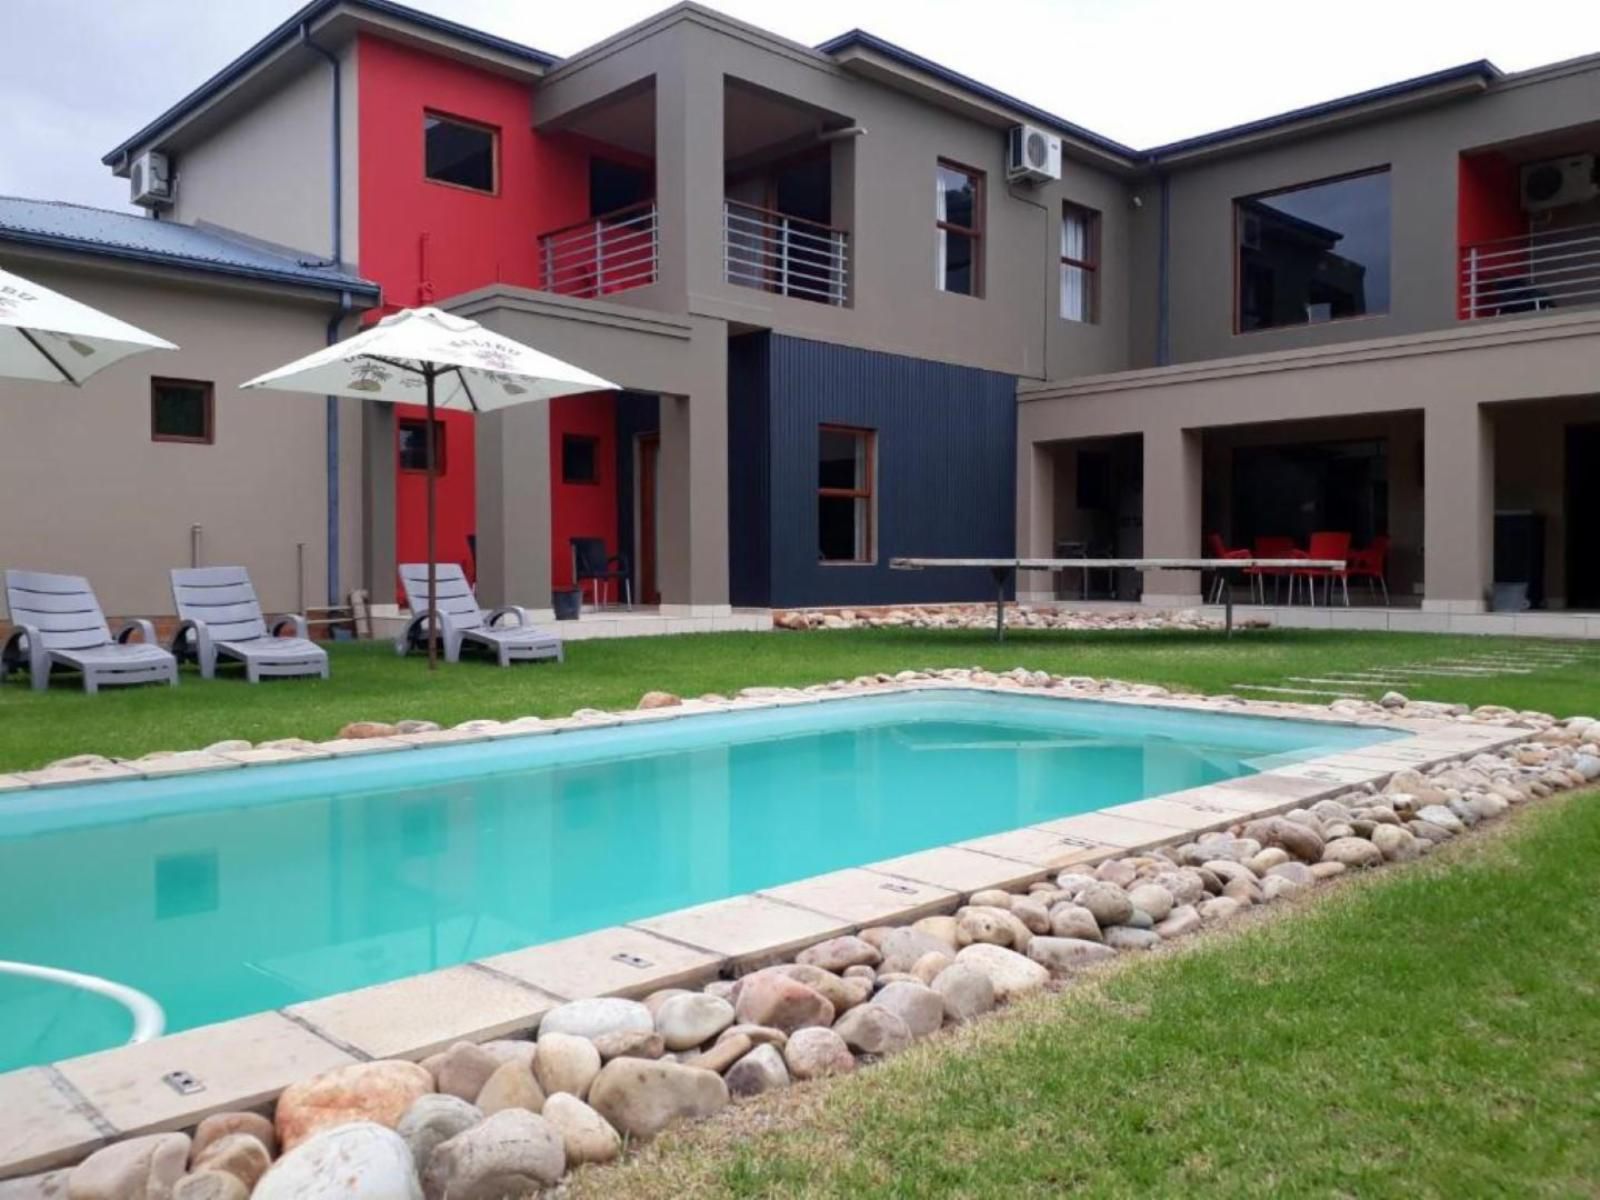 Karoo Sun Guest House Oudtshoorn Western Cape South Africa Complementary Colors, House, Building, Architecture, Swimming Pool